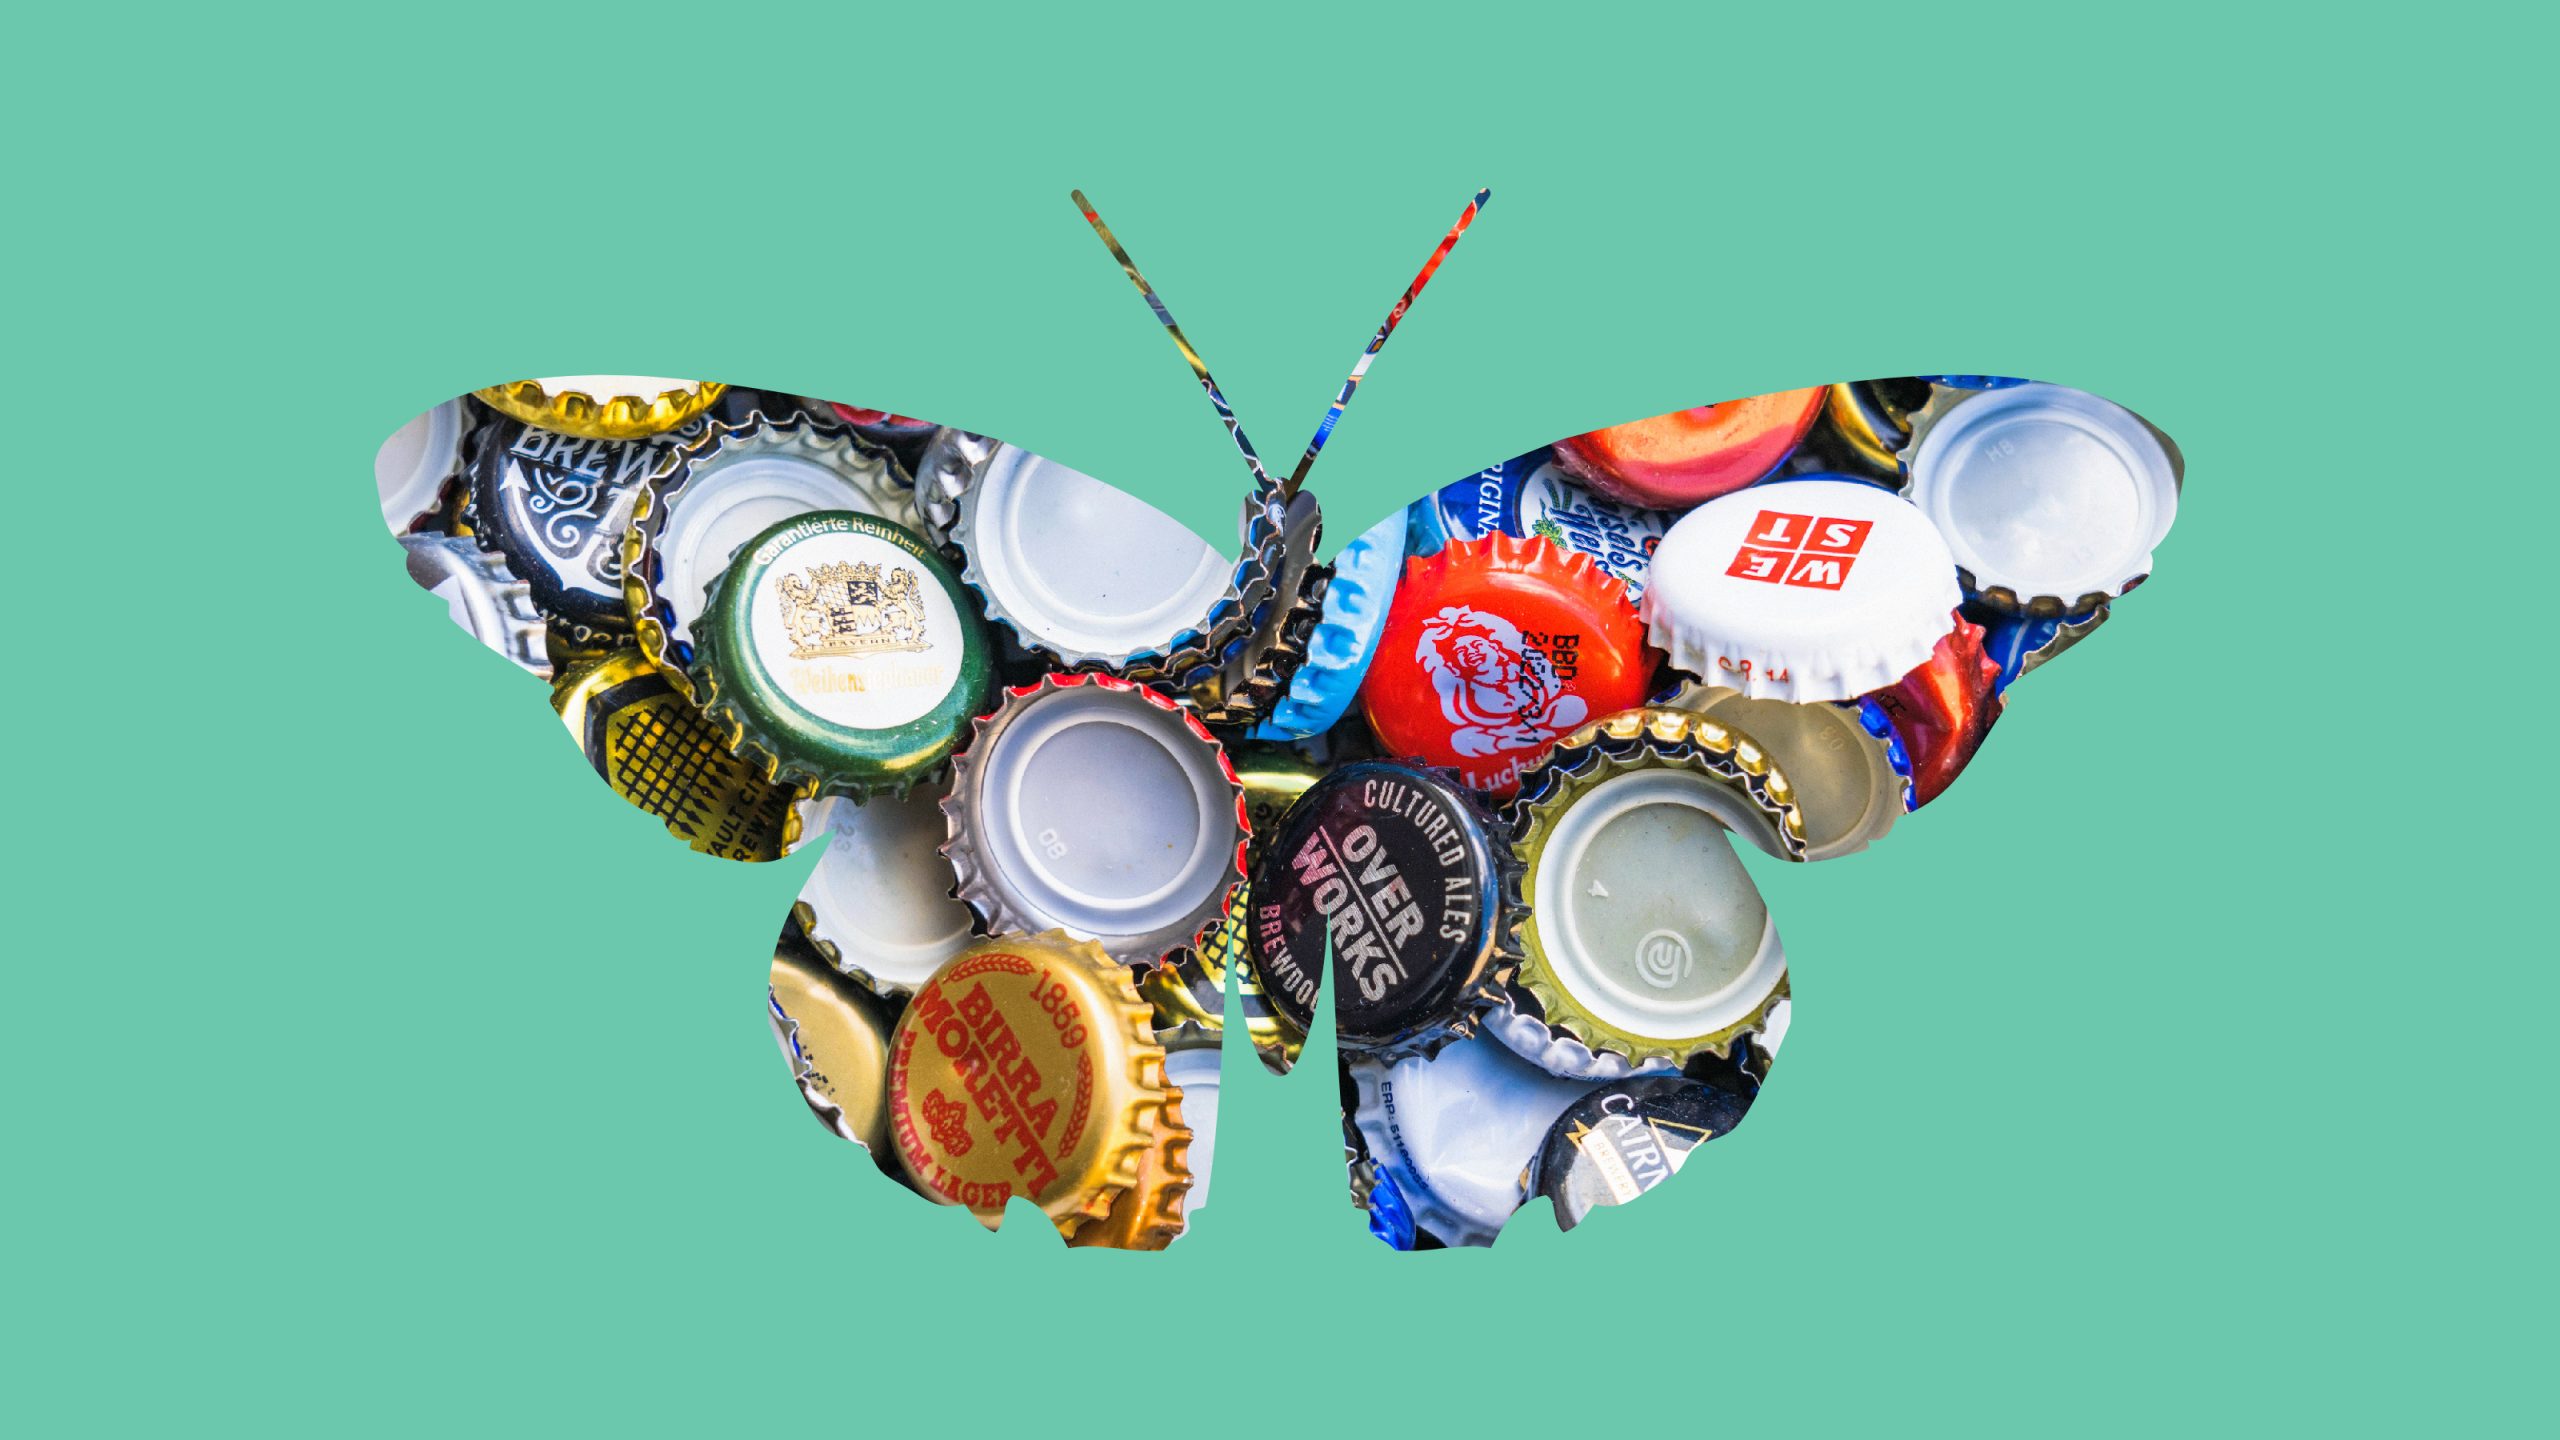 A butterfly shape, filled with dozens of colorful beer bottle caps, on a green background